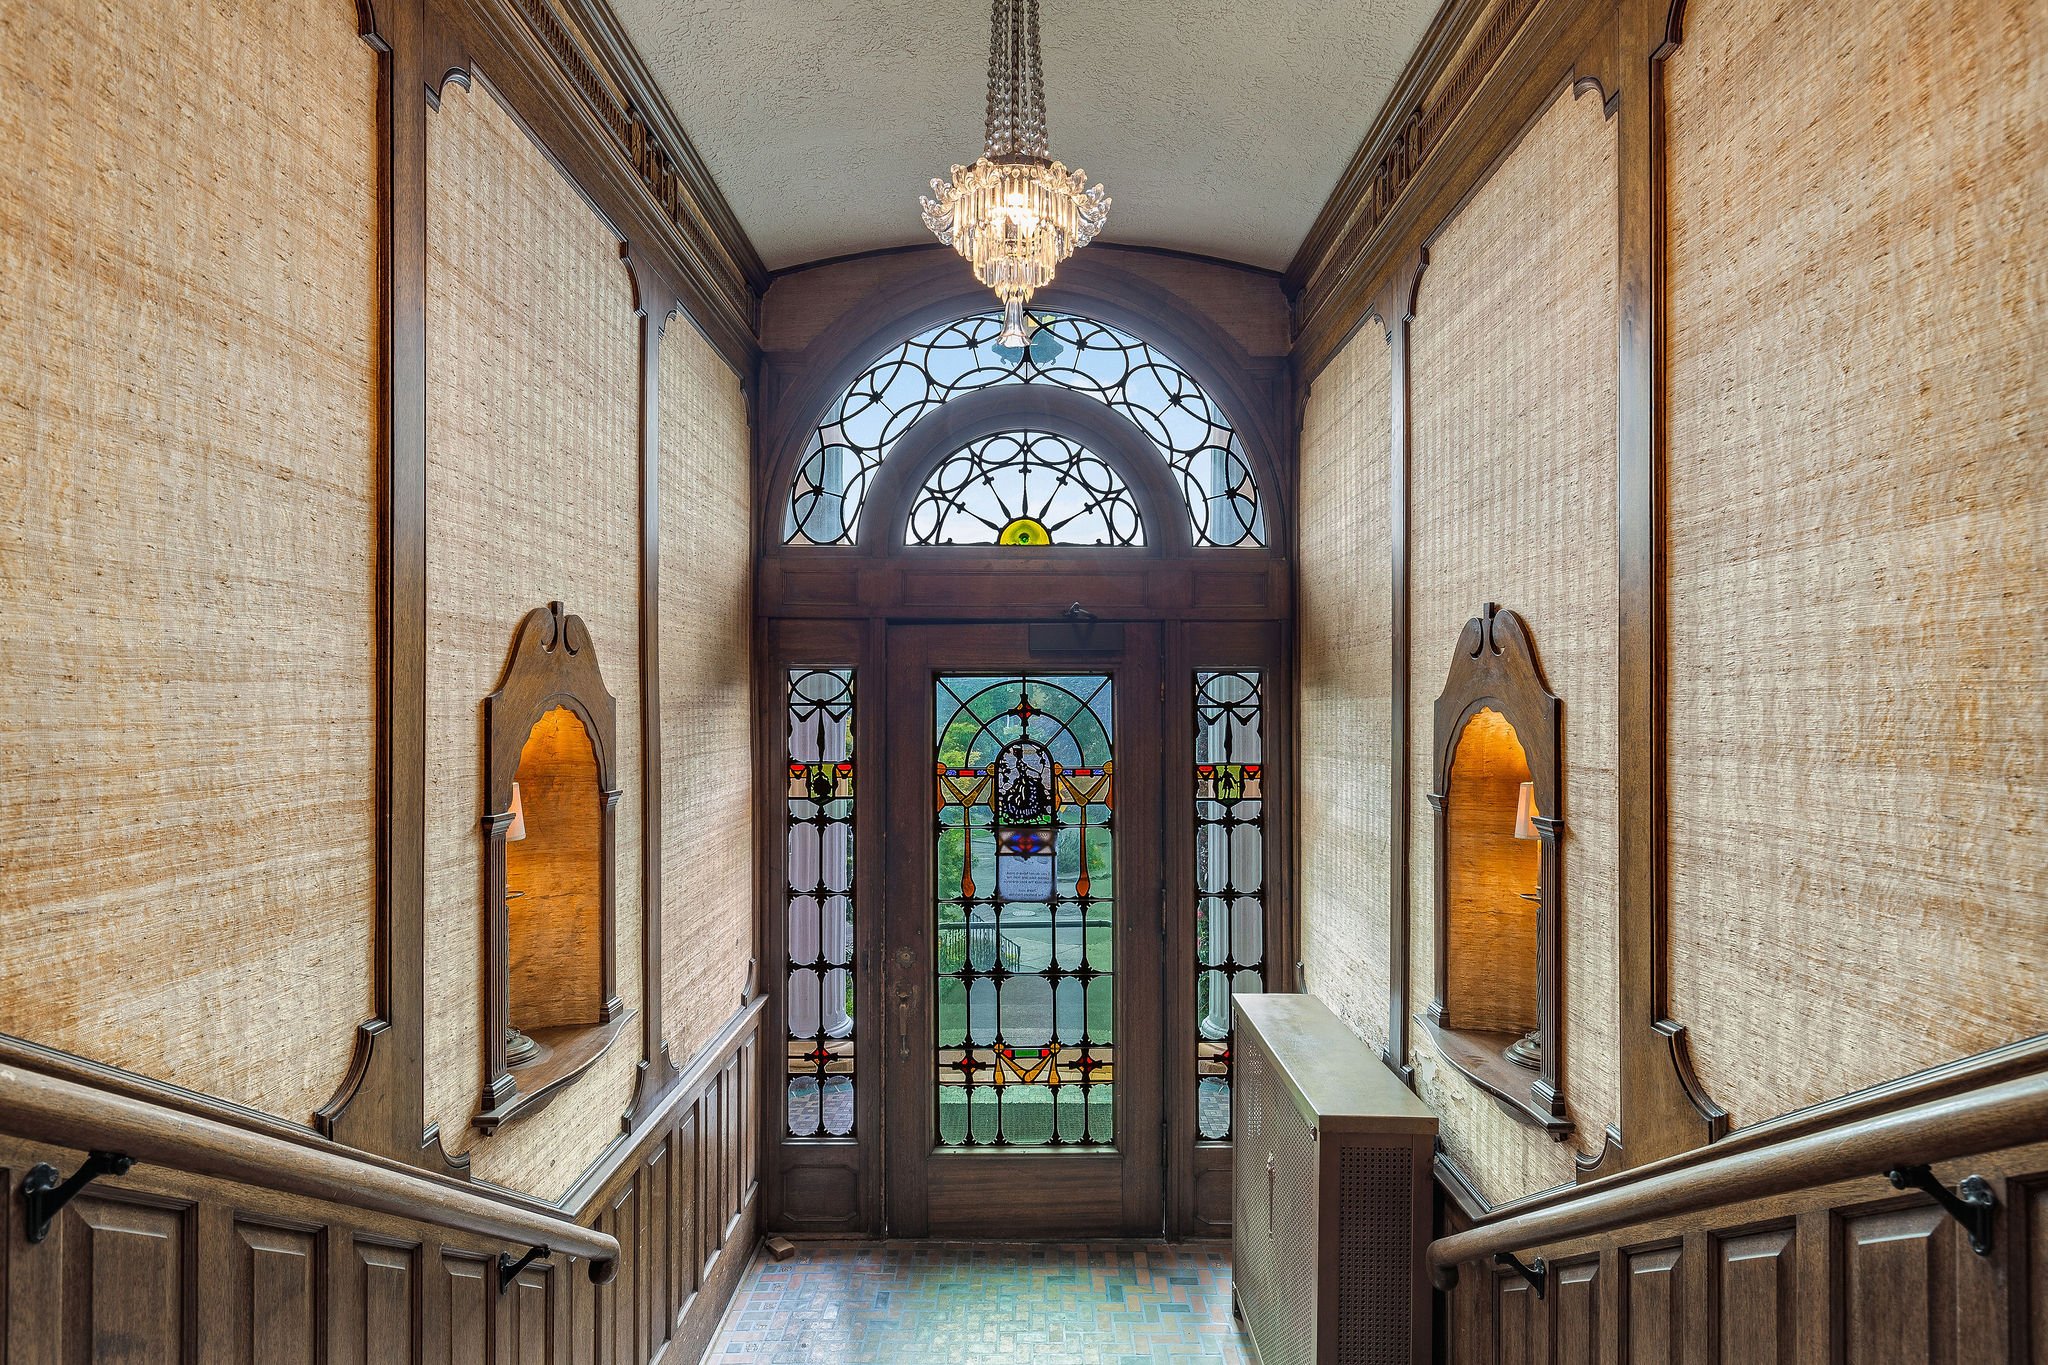 Mahogany woodwork, original chandeliers and stained glass detail in the lobby entrance. 